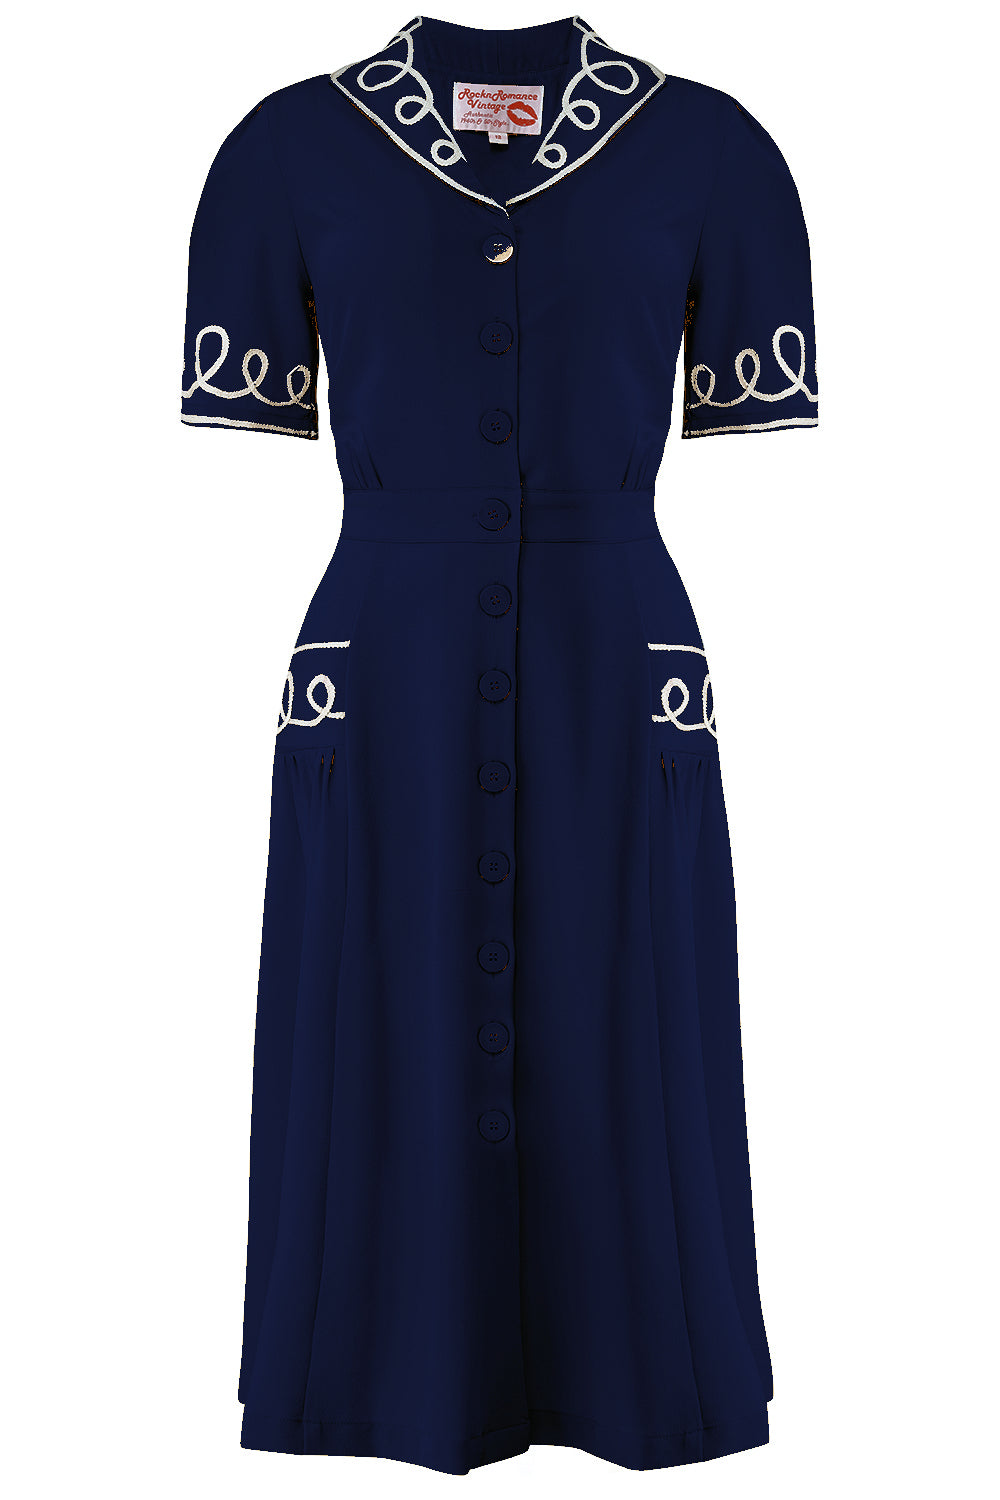 The "Loopy-Lou" Shirtwaister Dress in Navy with Contrast RicRac, True 1950s Vintage Style - True and authentic vintage style clothing, inspired by the Classic styles of CC41 , WW2 and the fun 1950s RocknRoll era, for everyday wear plus events like Goodwood Revival, Twinwood Festival and Viva Las Vegas Rockabilly Weekend Rock n Romance Rock n Romance